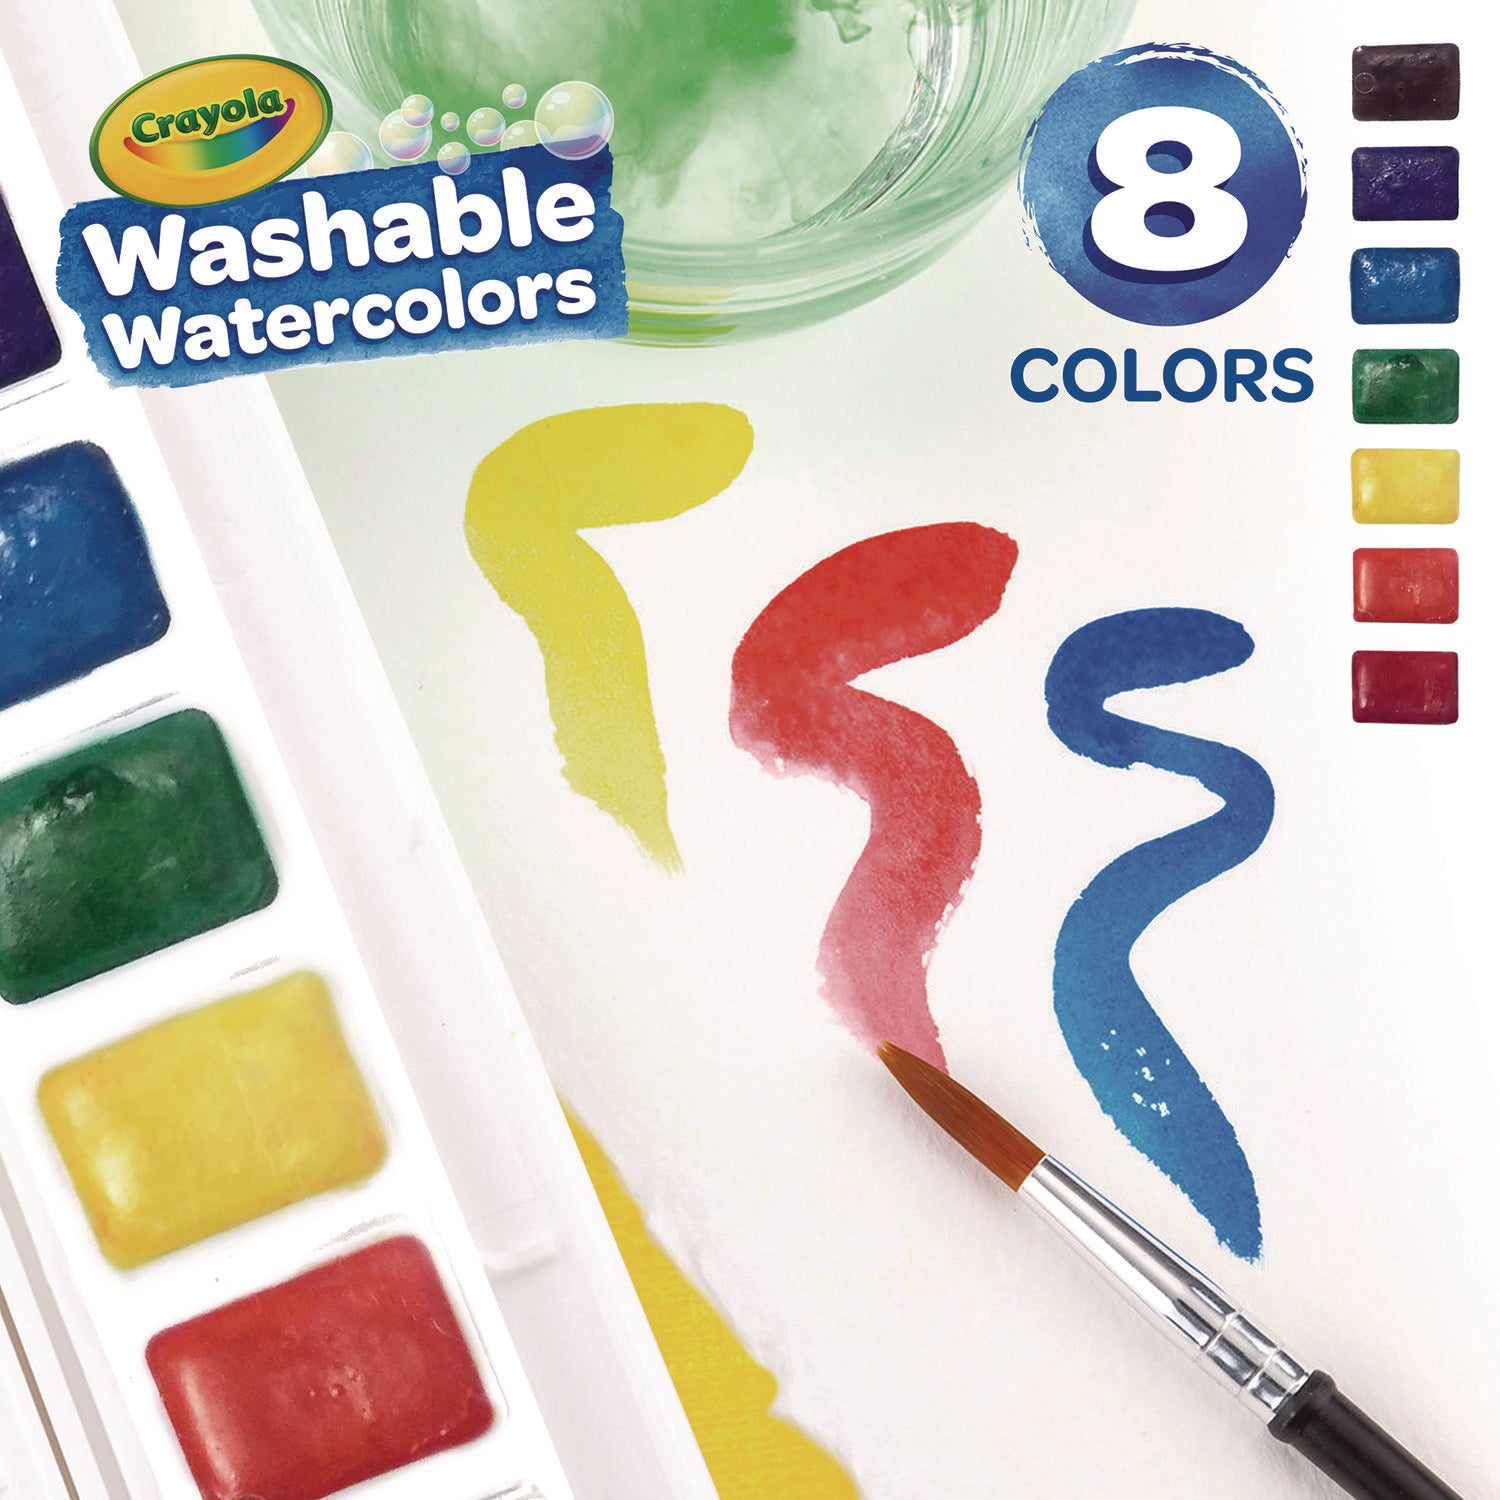 Washable Watercolor Paint, 8 Assorted Colors, Palette Tray - 